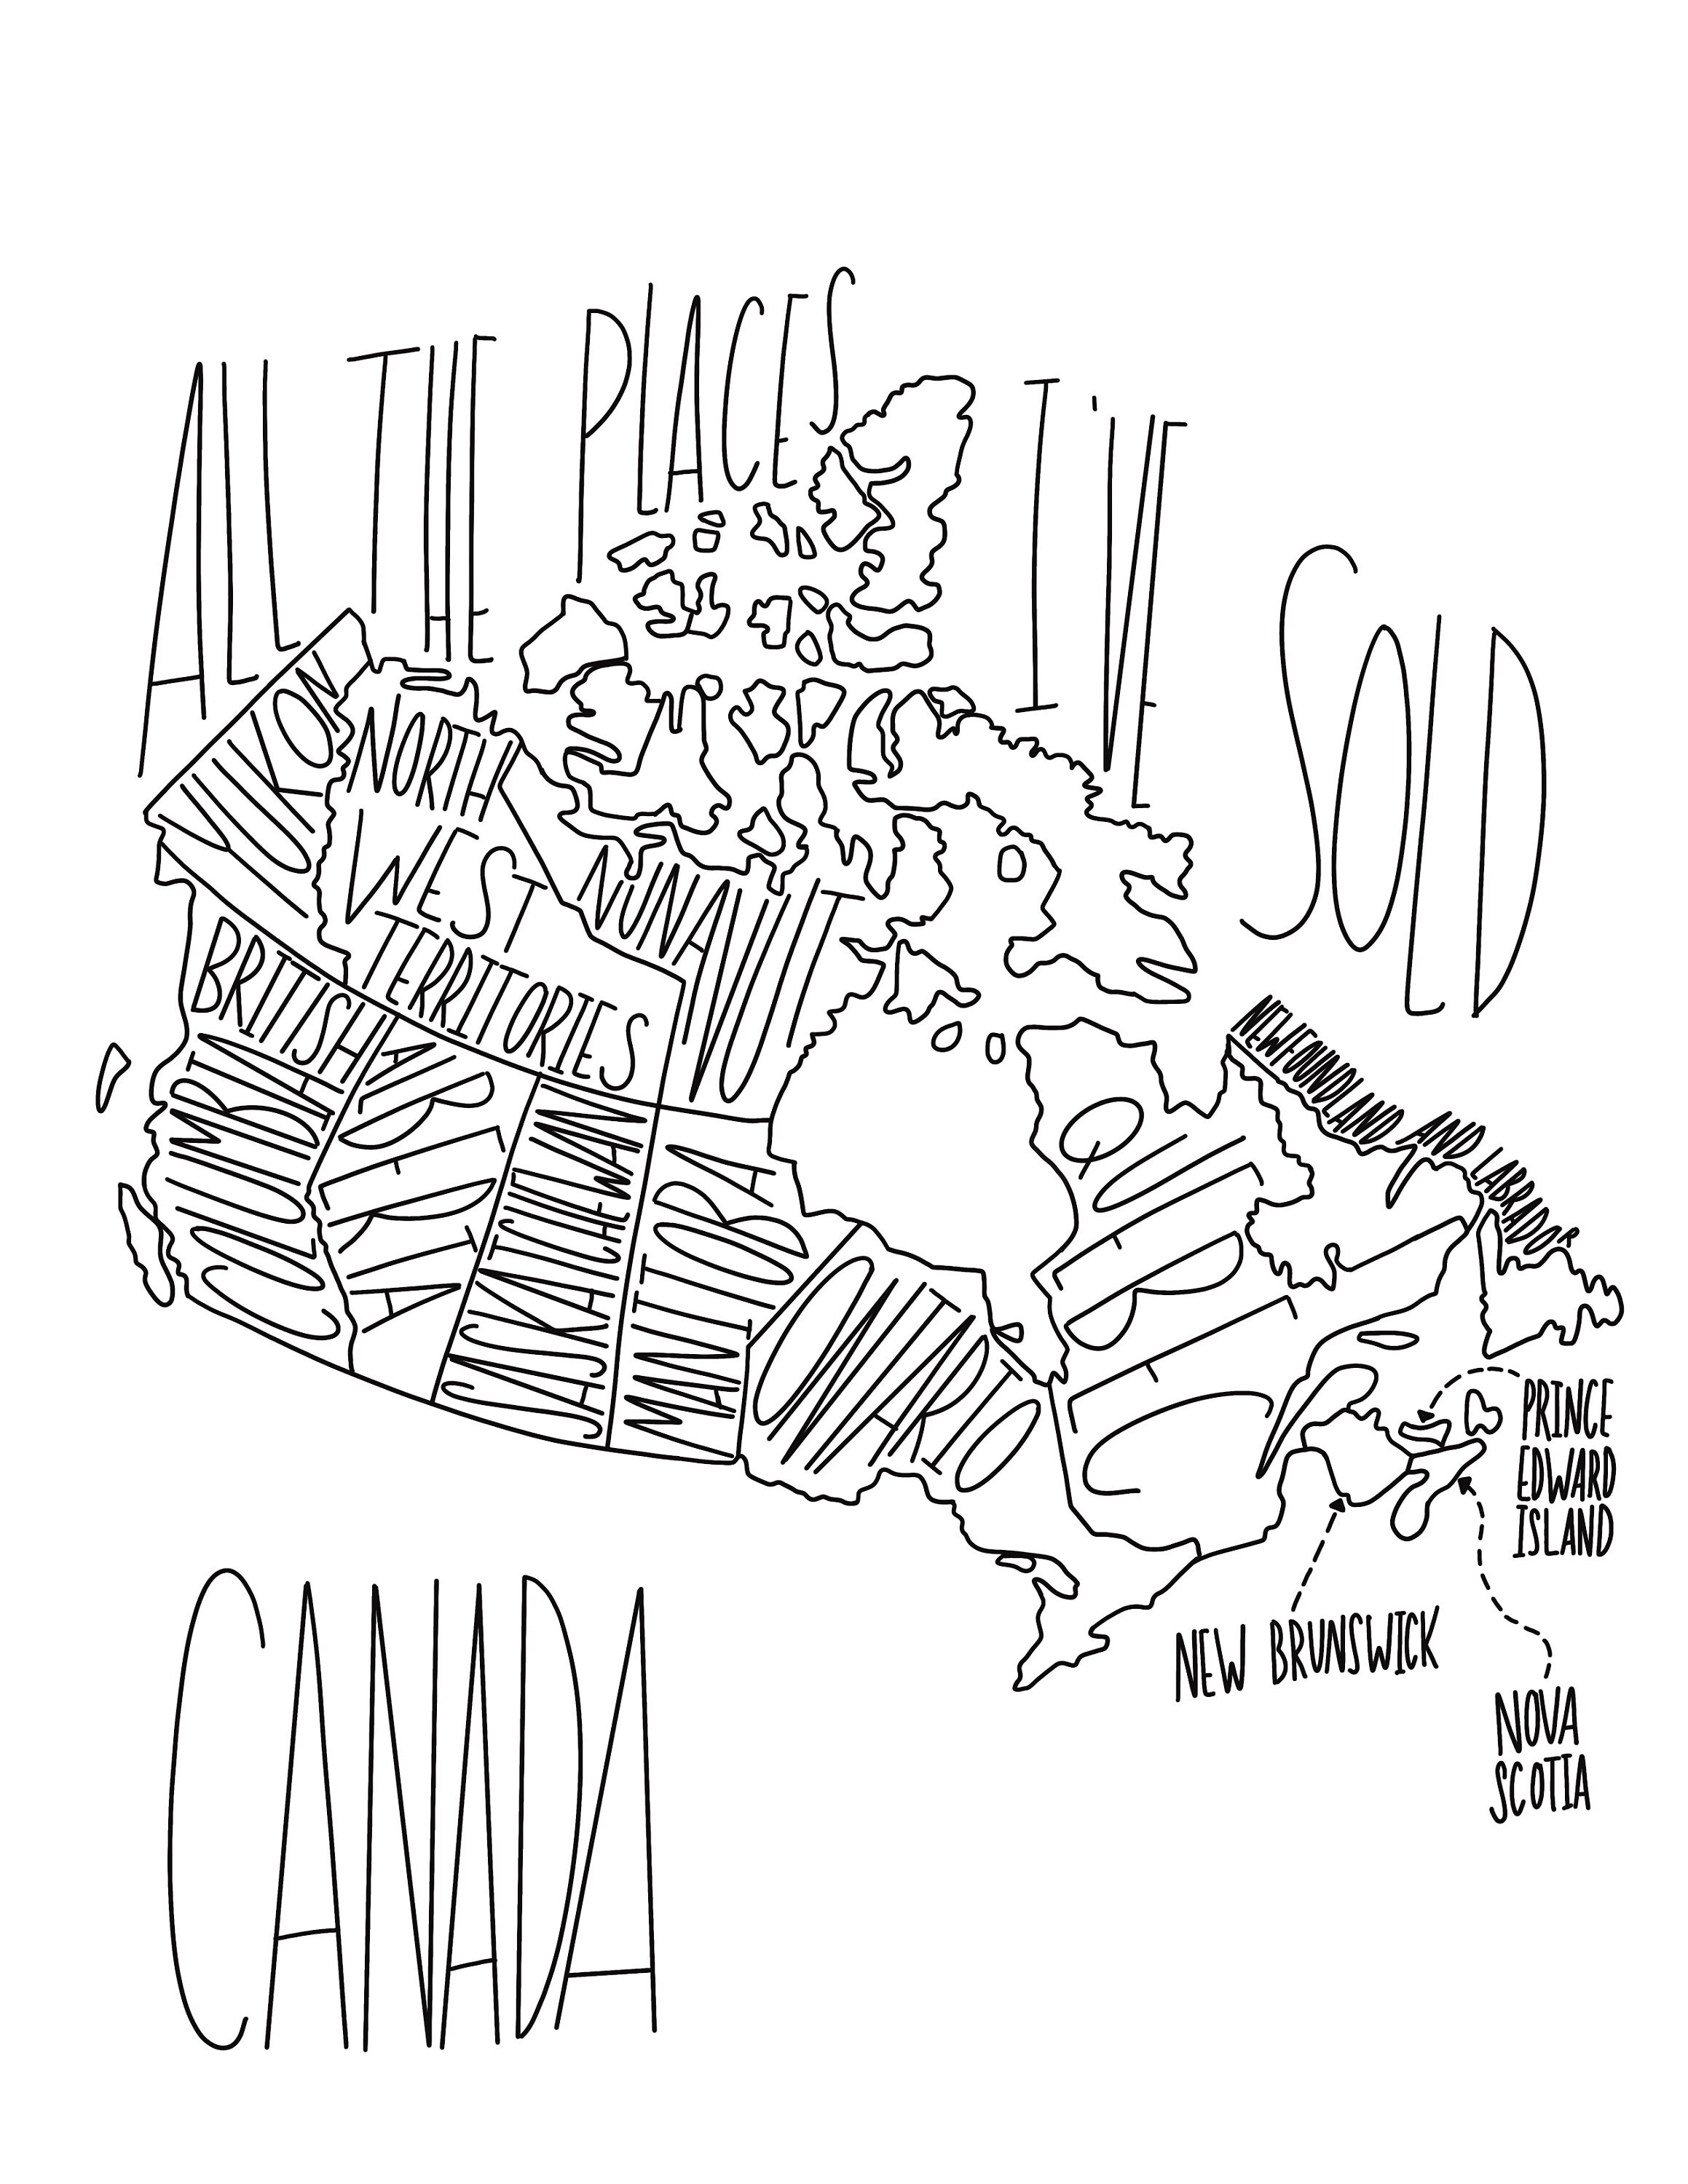 Digital download canada map canadian map all the places i have sold map small business map coloring sheet map where i have sold